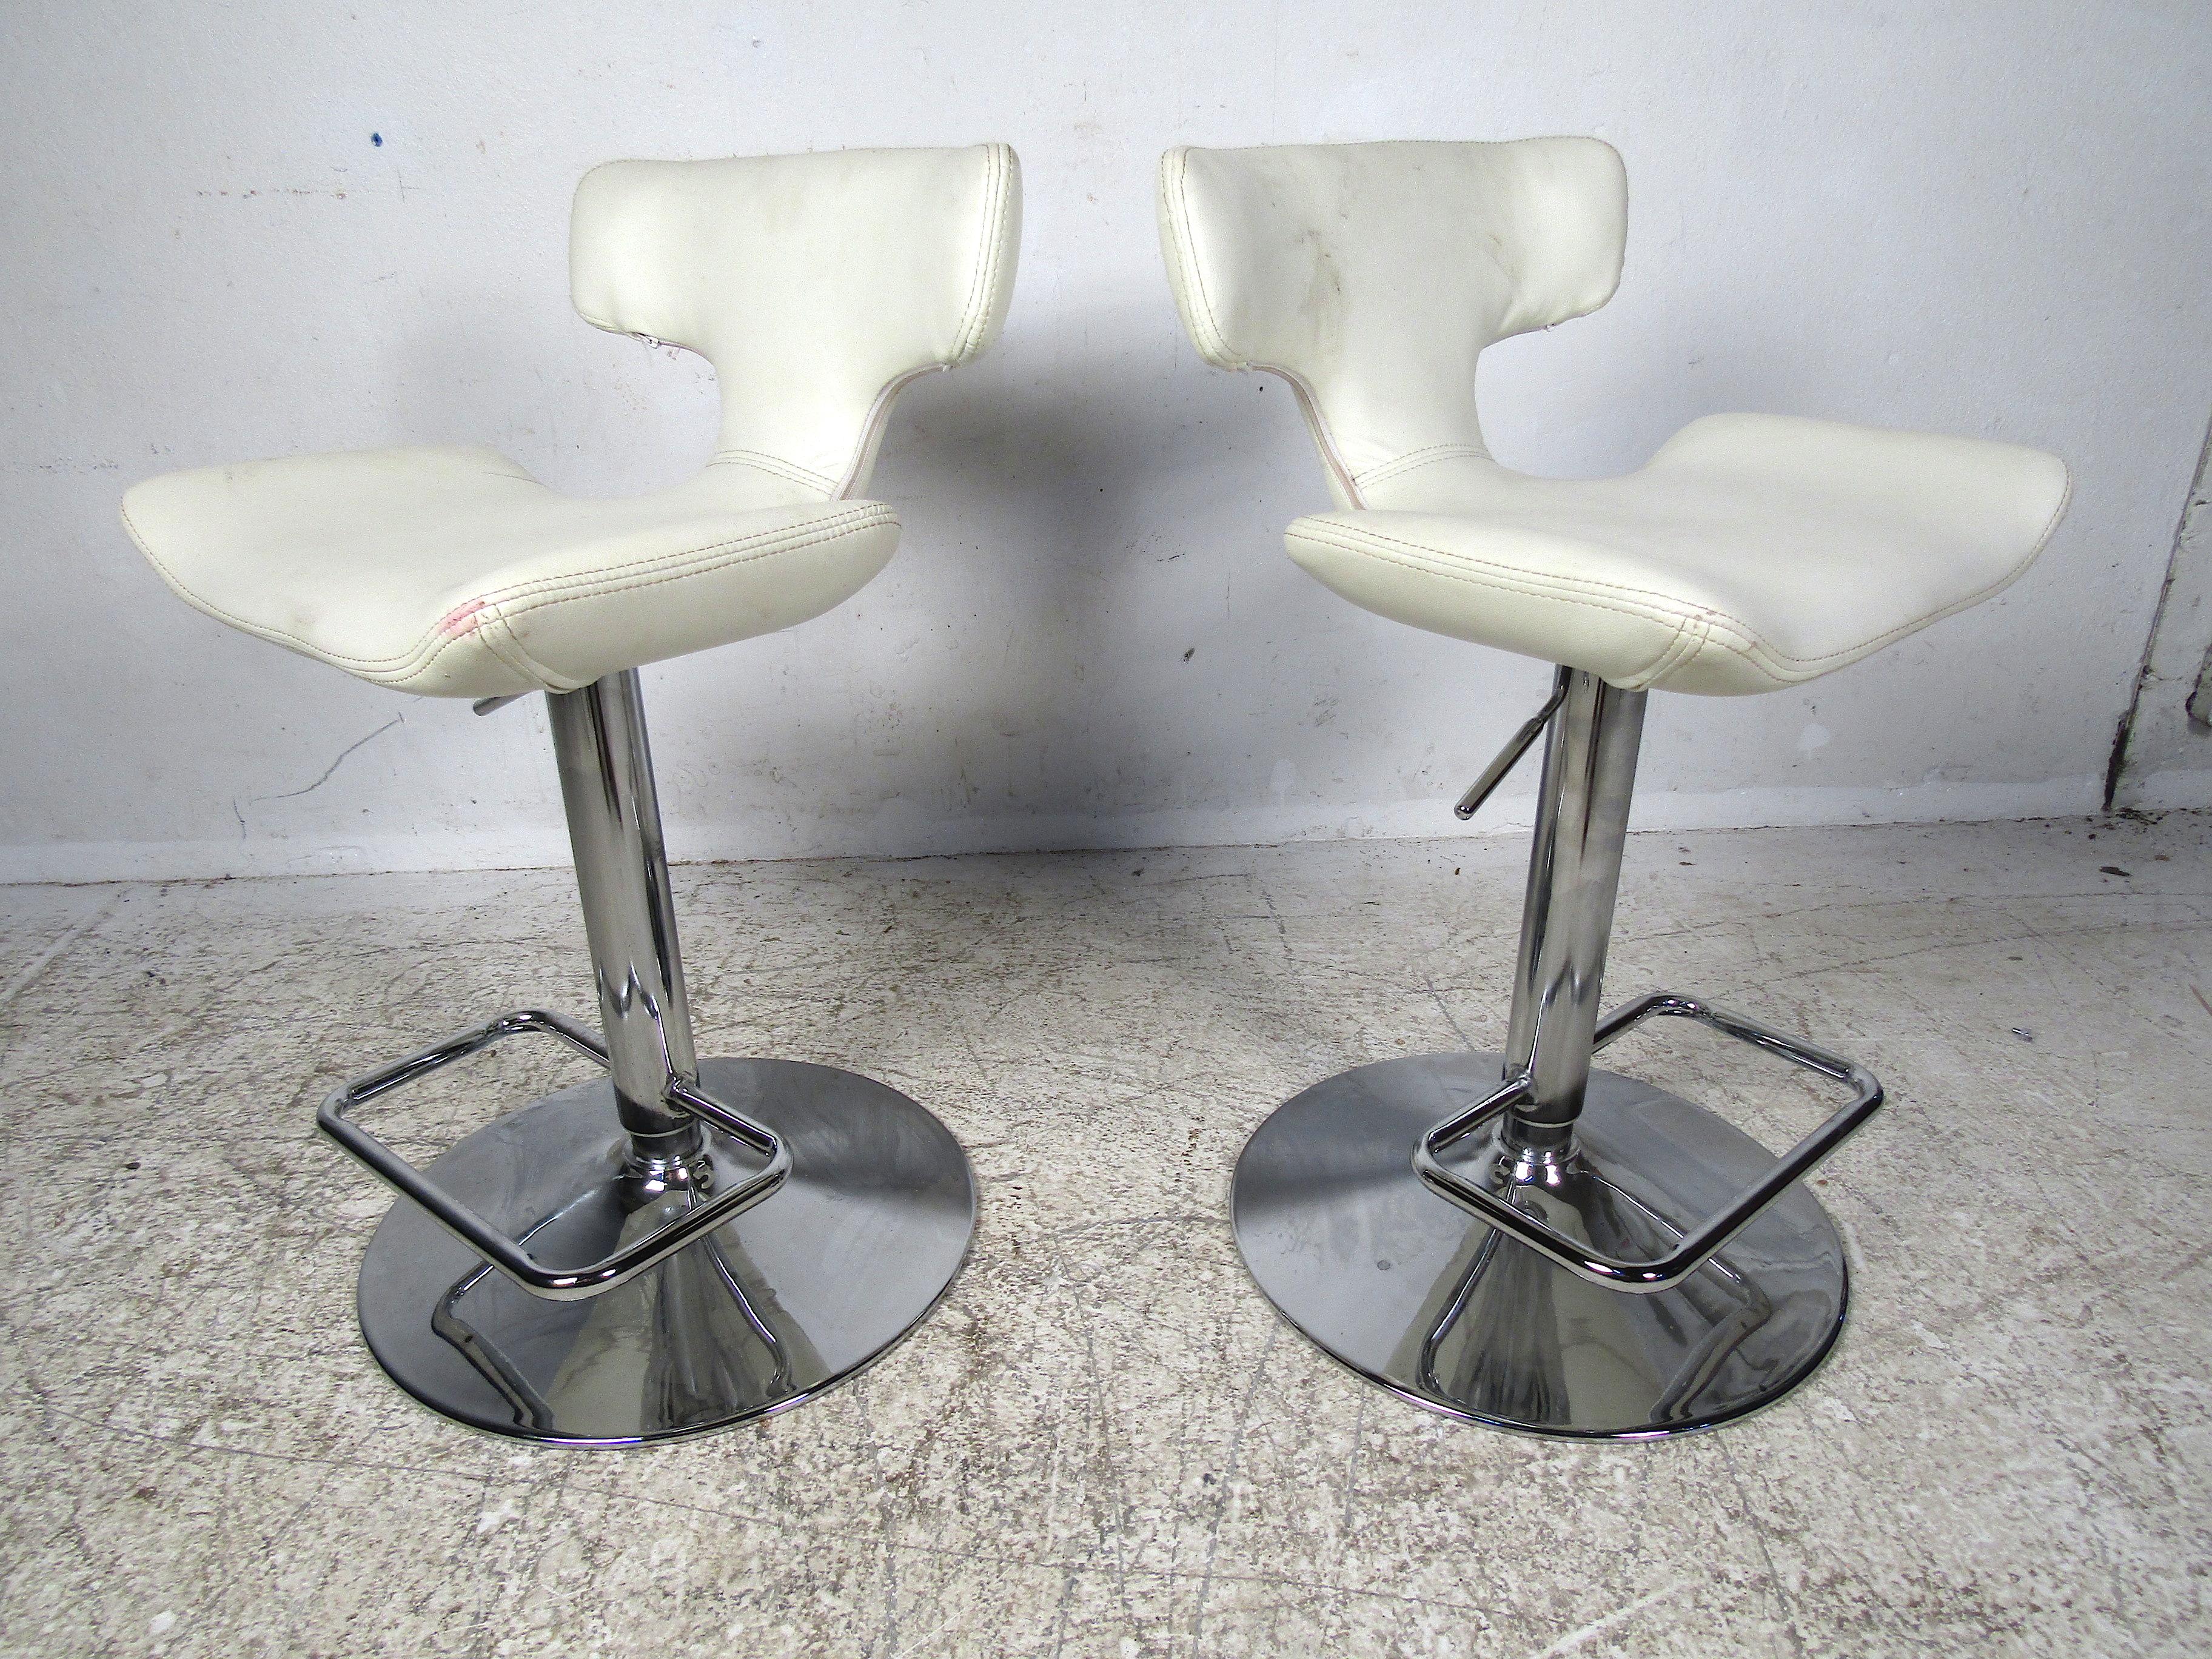 Nice pair of vintage stools. Adjustable height settings. White vinyl upholstery. Unusual design on seat and backrest. Sturdy chrome bases and footrests. Please confirm the item's location with the dealer (NJ or NY).